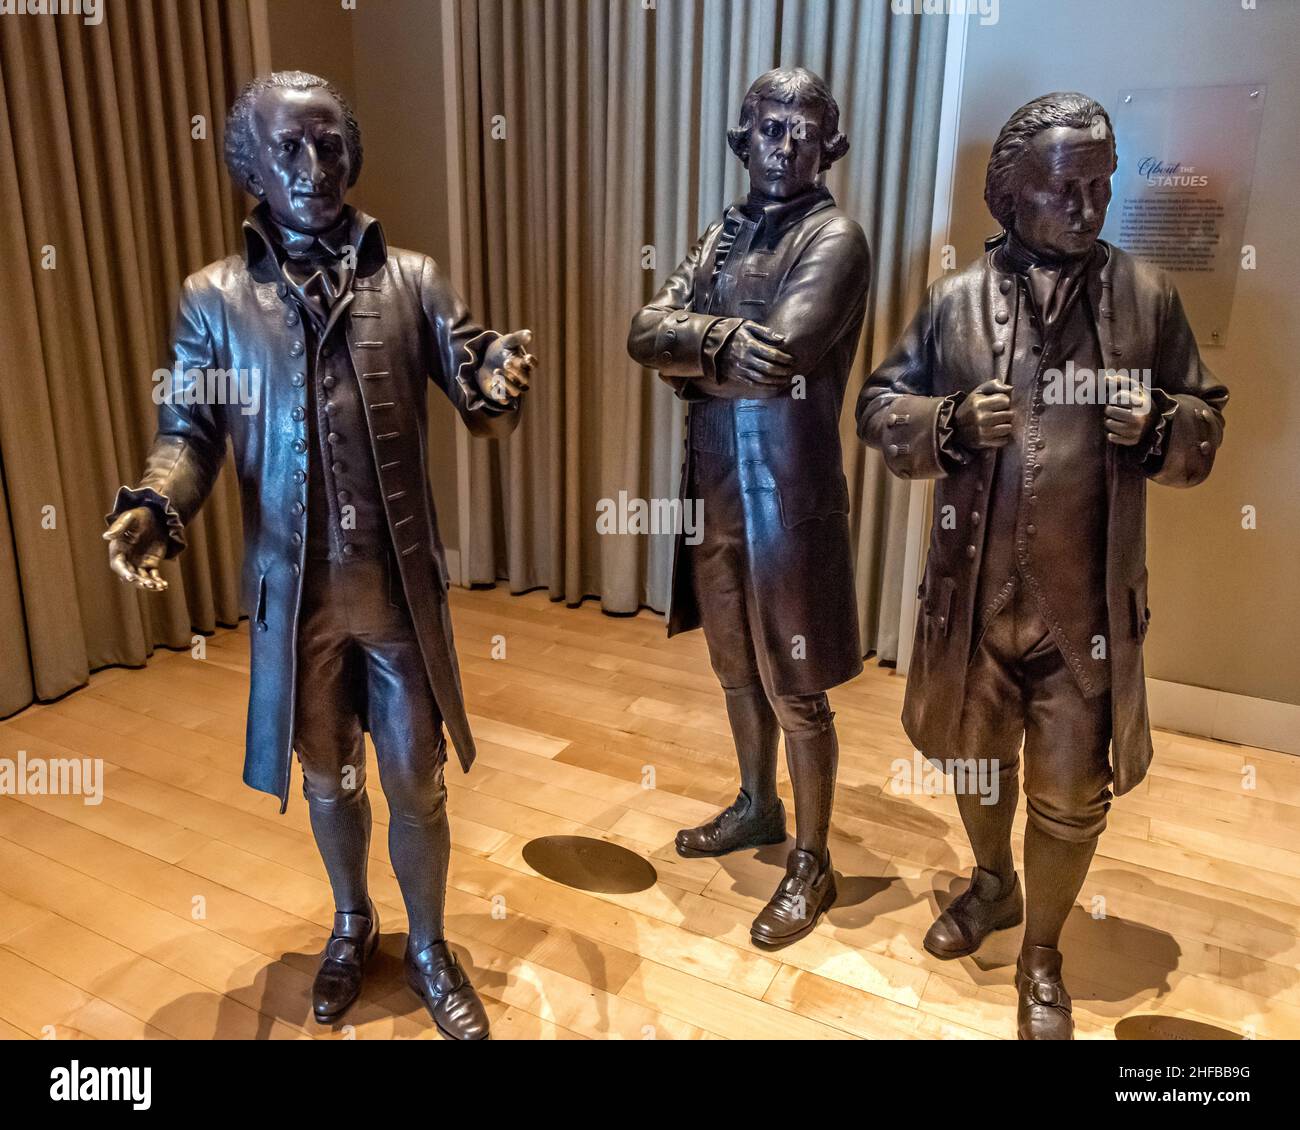 The bronze statues of (L to R) Elbridge Gerry, Edmund Randolph and George Mason in the Signers' Hall at Philadelphia's National Constitution Center Stock Photo